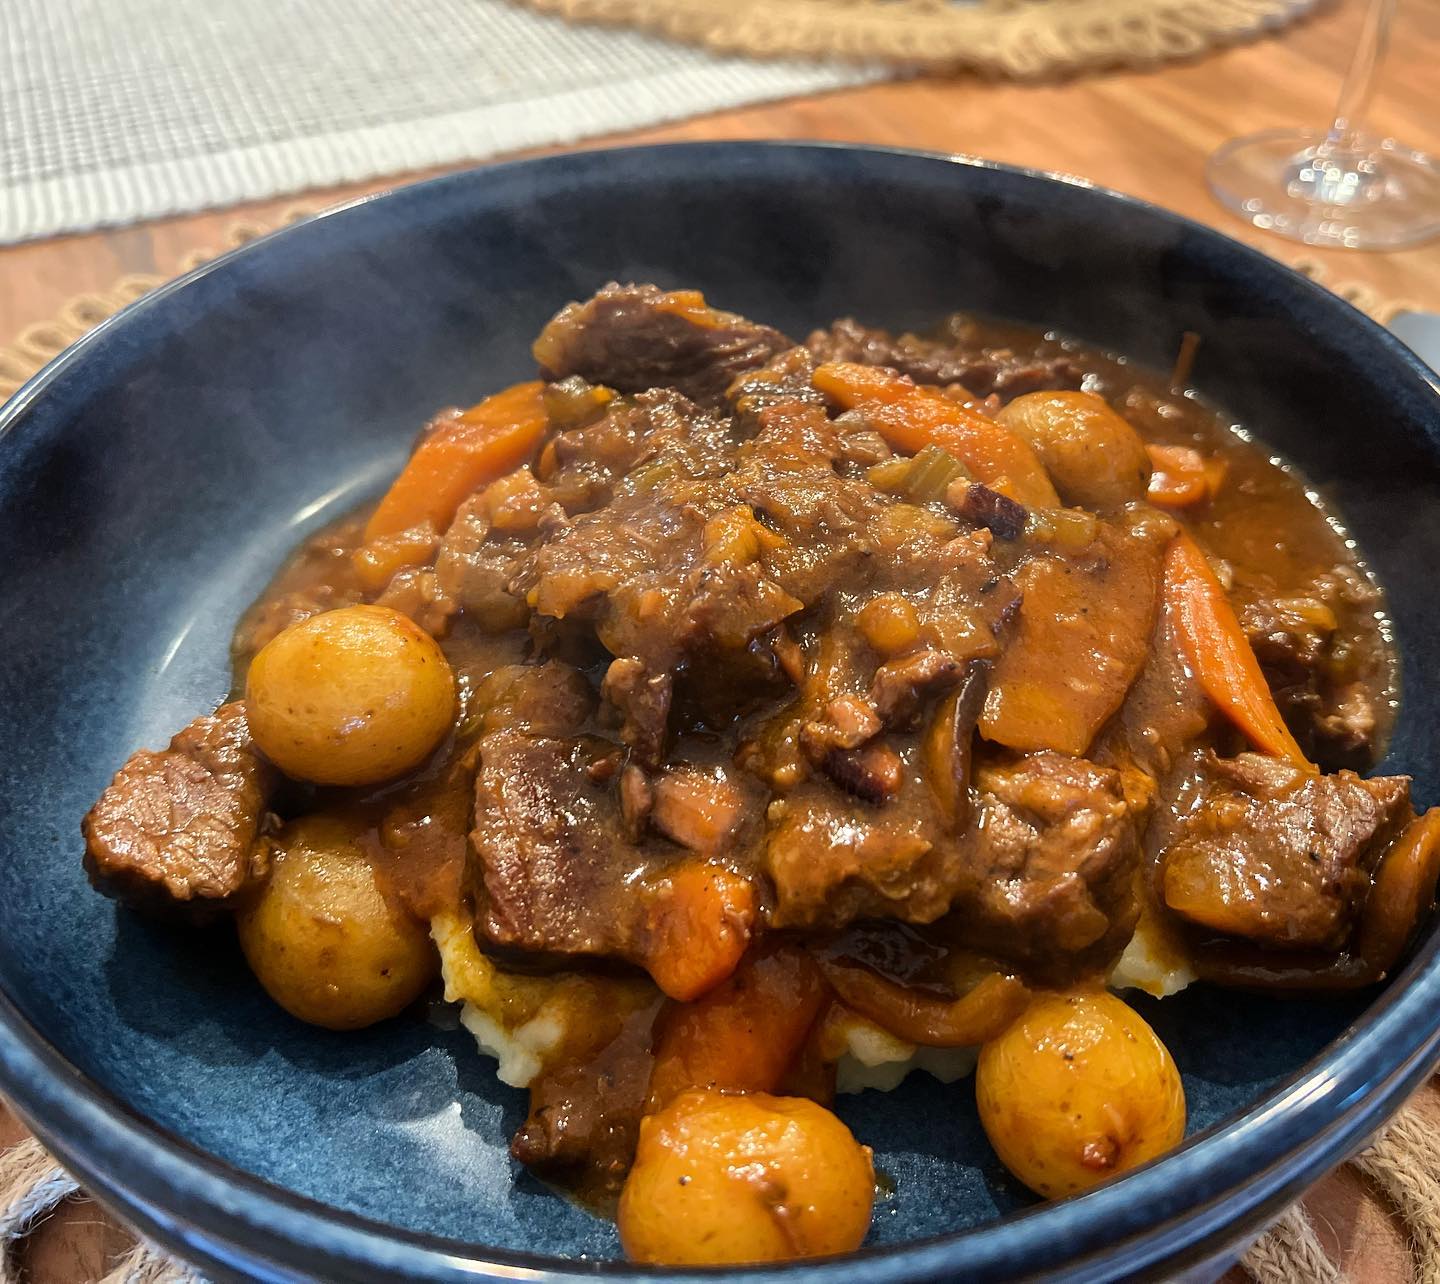 Guinness Beef Stew with silky potato purée
One of my favorite comfort food dish…